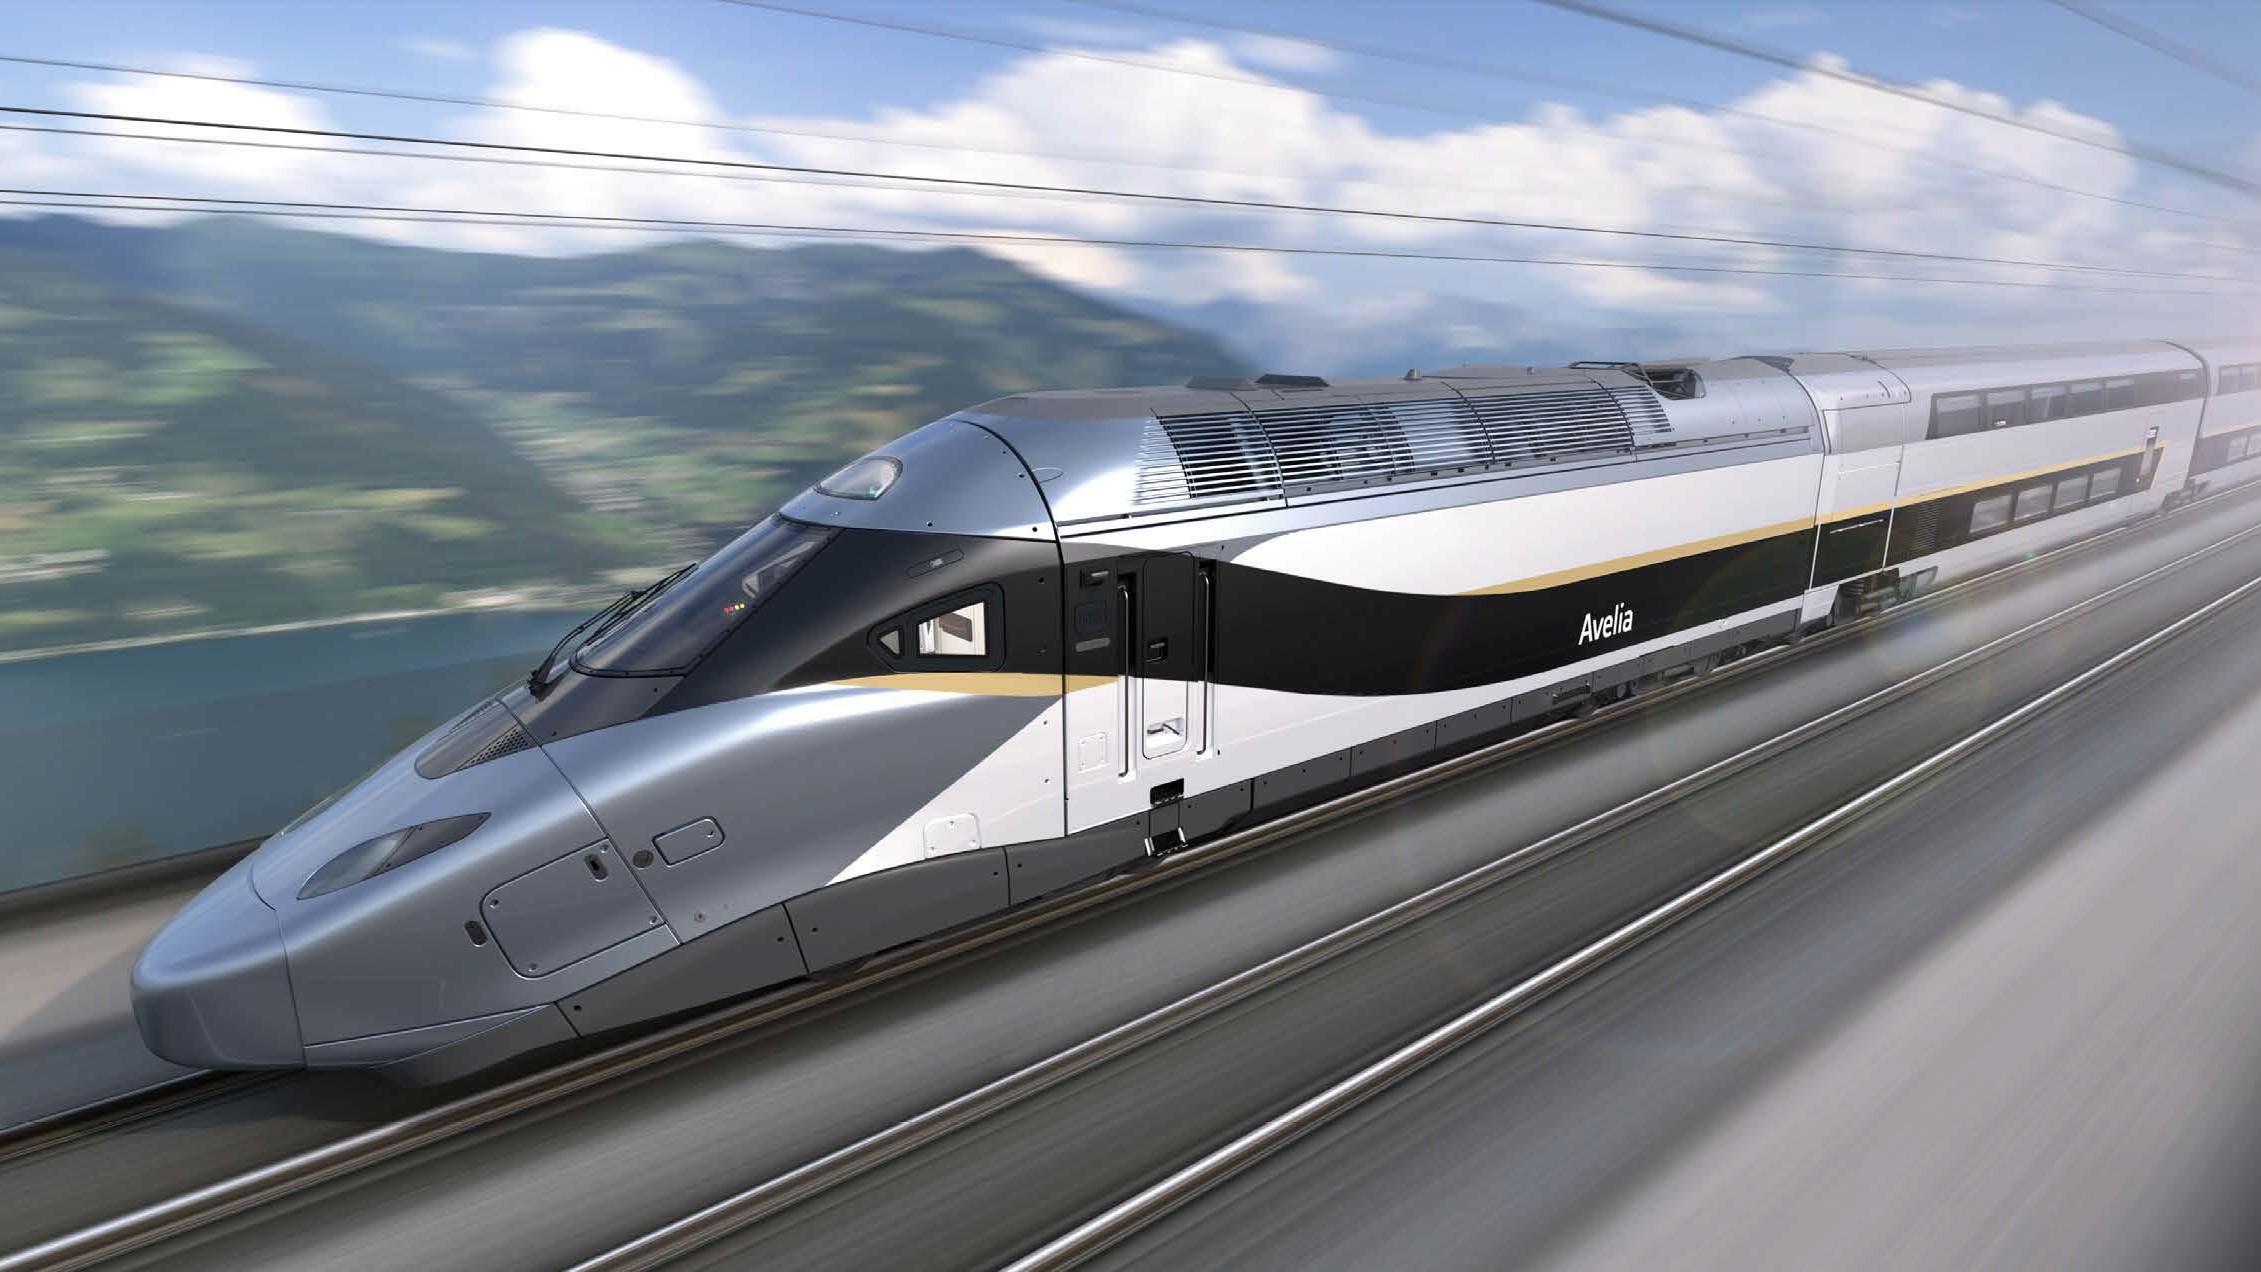 Europe is trying to move from planes to trains. Here's how that's going